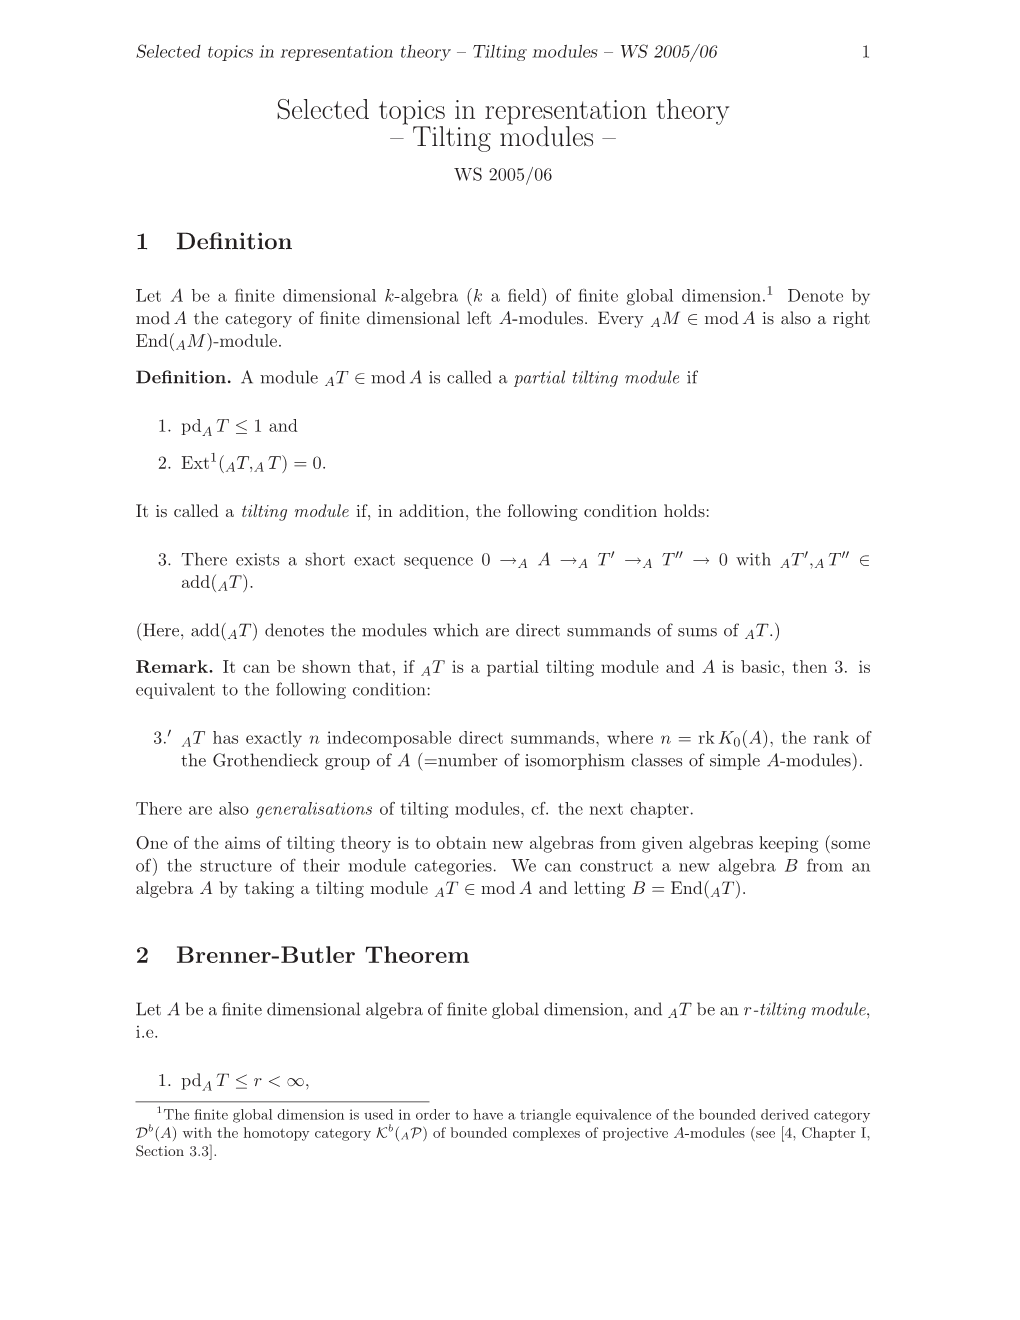 Selected Topics in Representation Theory – Tilting Modules – WS 2005/06 1